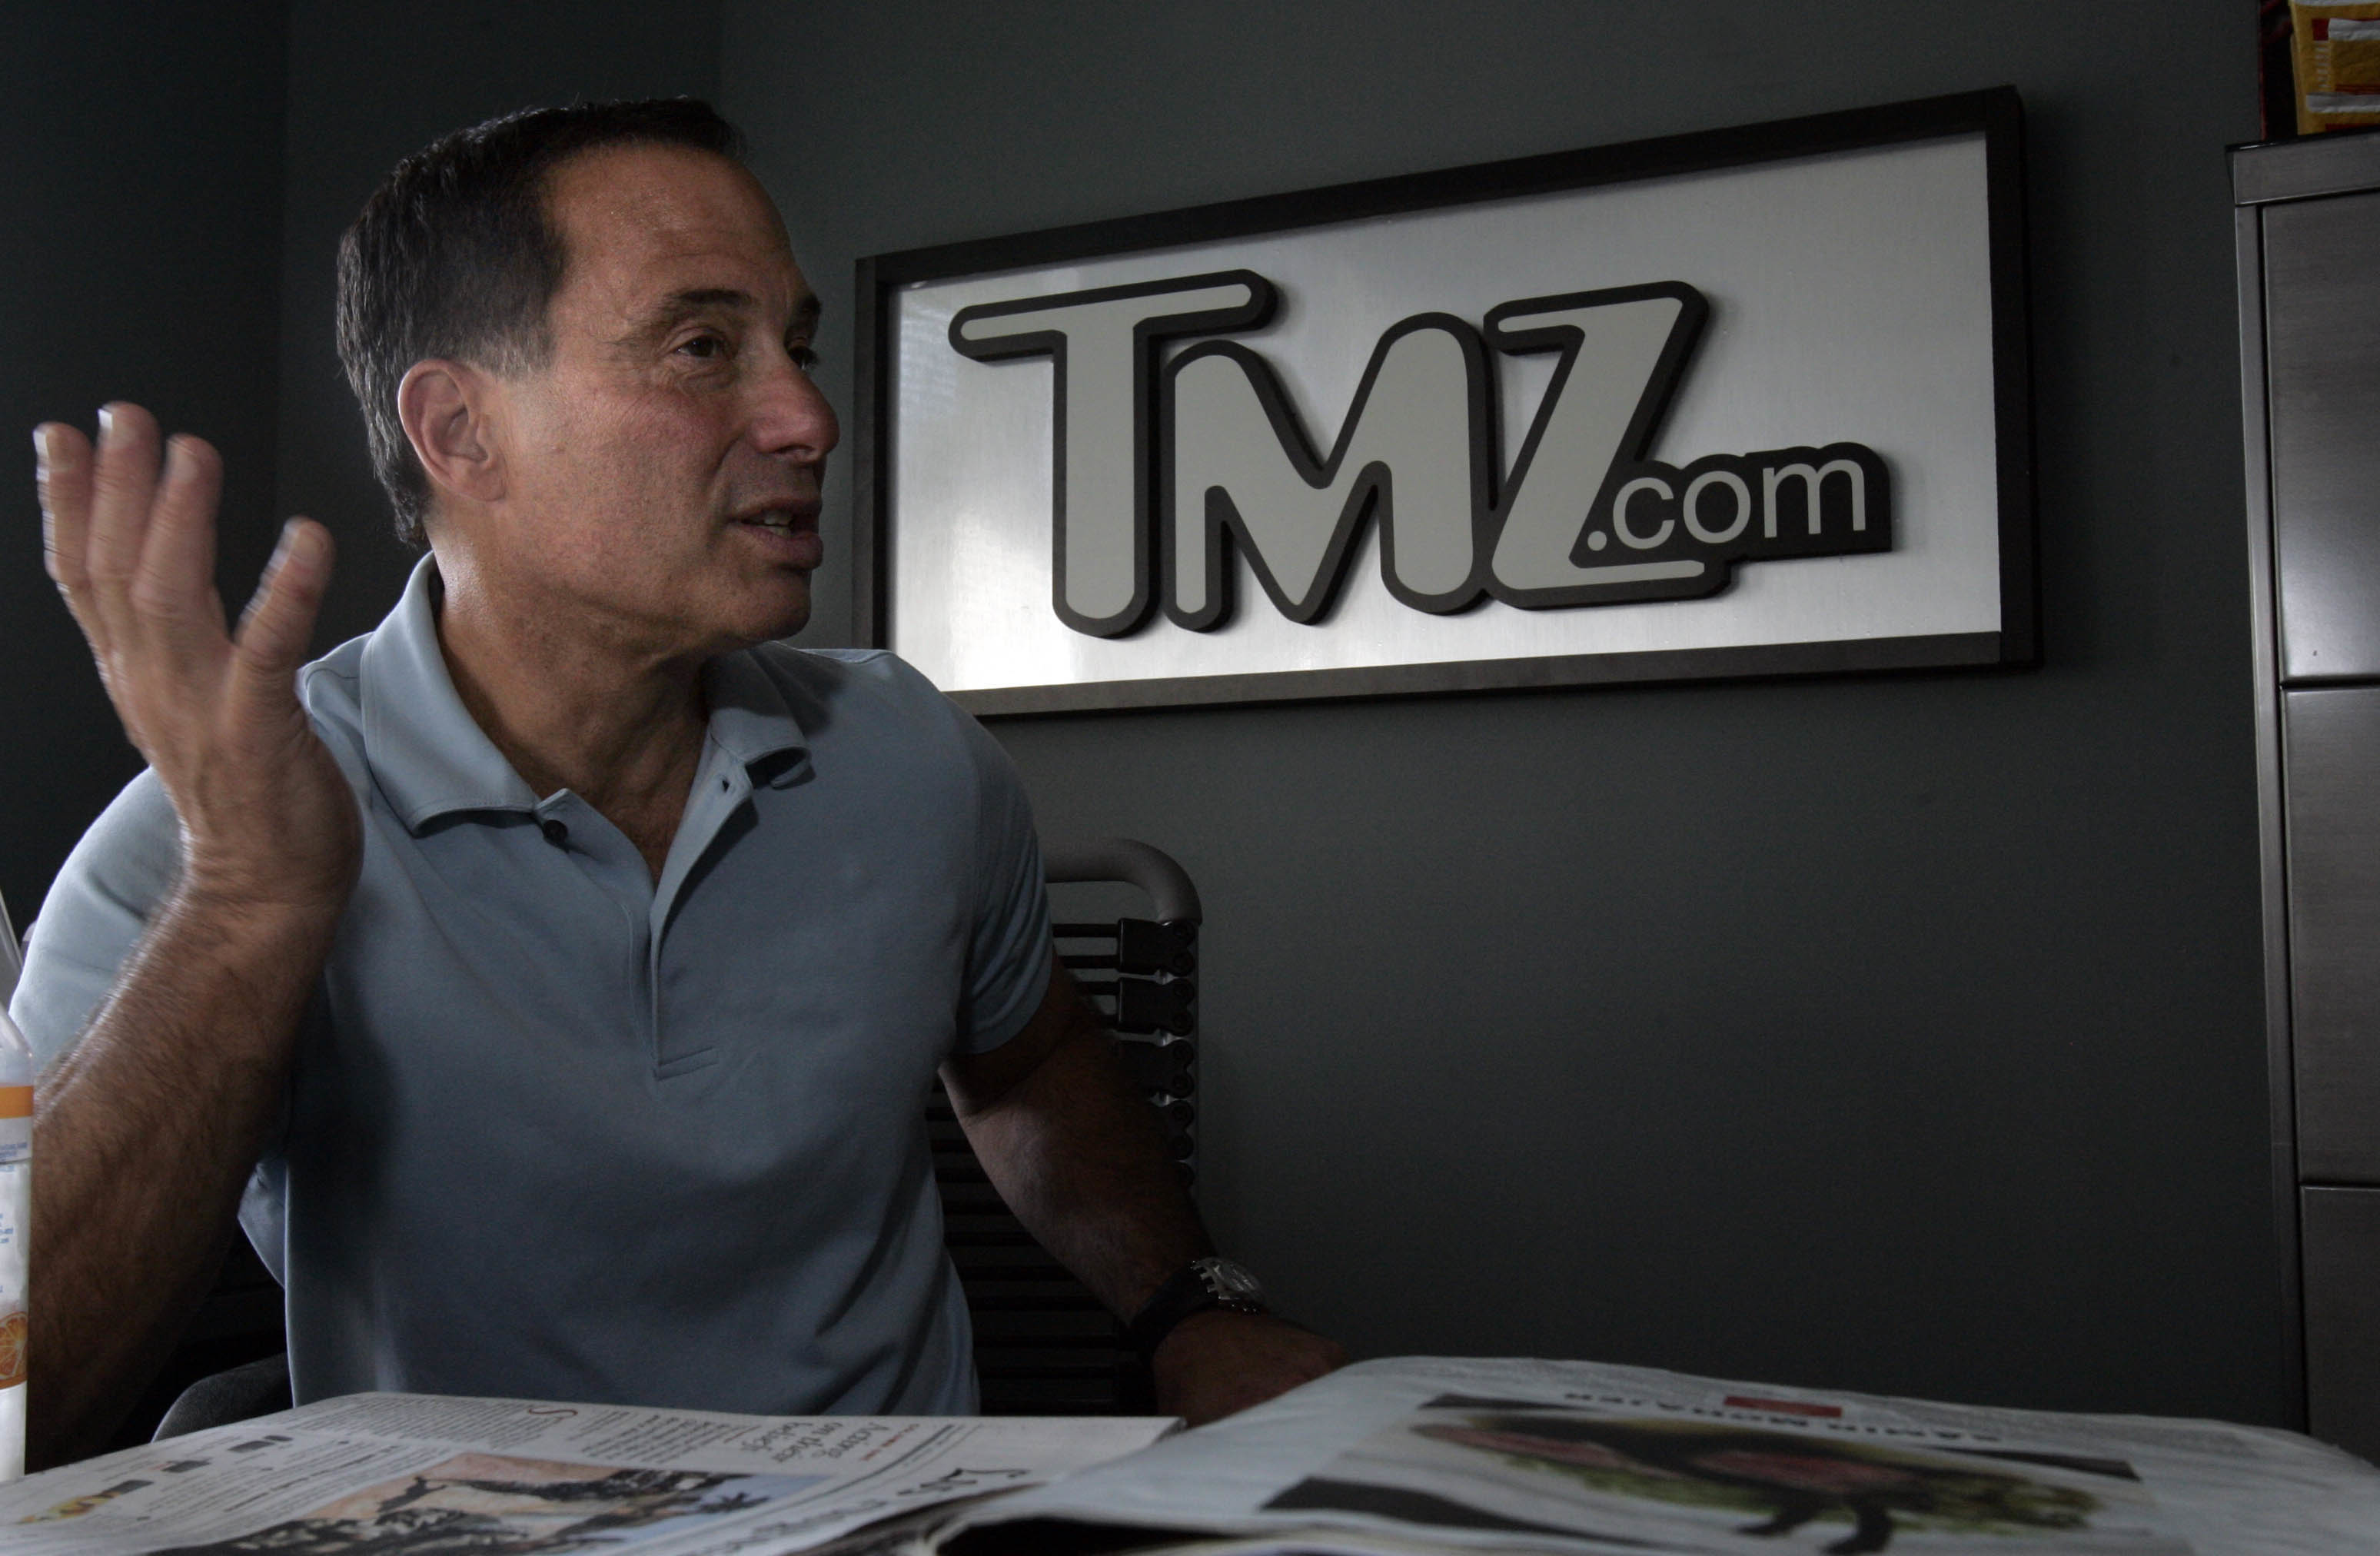 TMZ boss Harvey Levin at the website's offices in Glendale